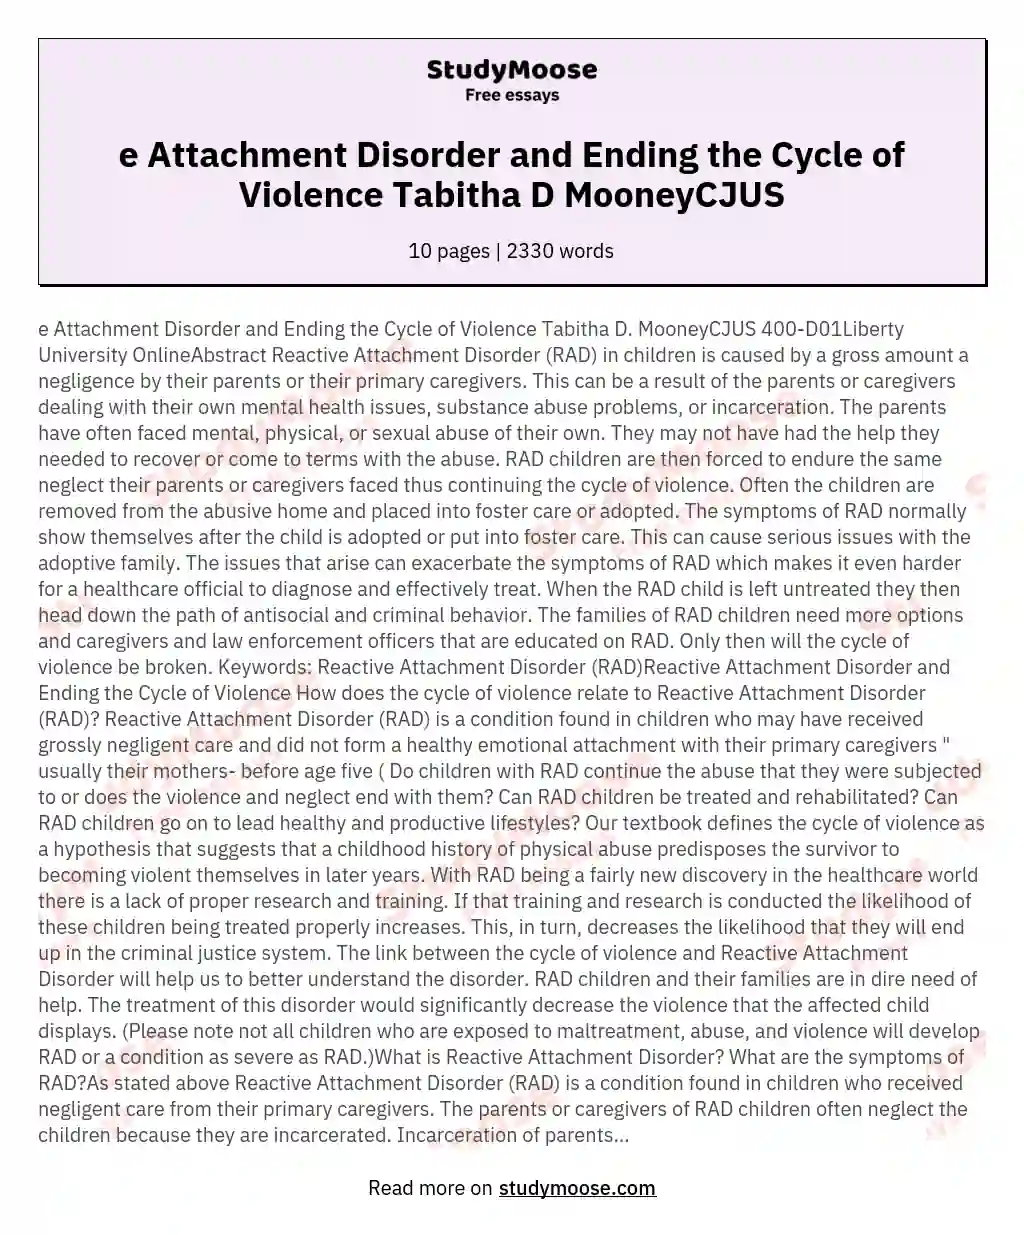 e Attachment Disorder and Ending the Cycle of Violence Tabitha D MooneyCJUS essay